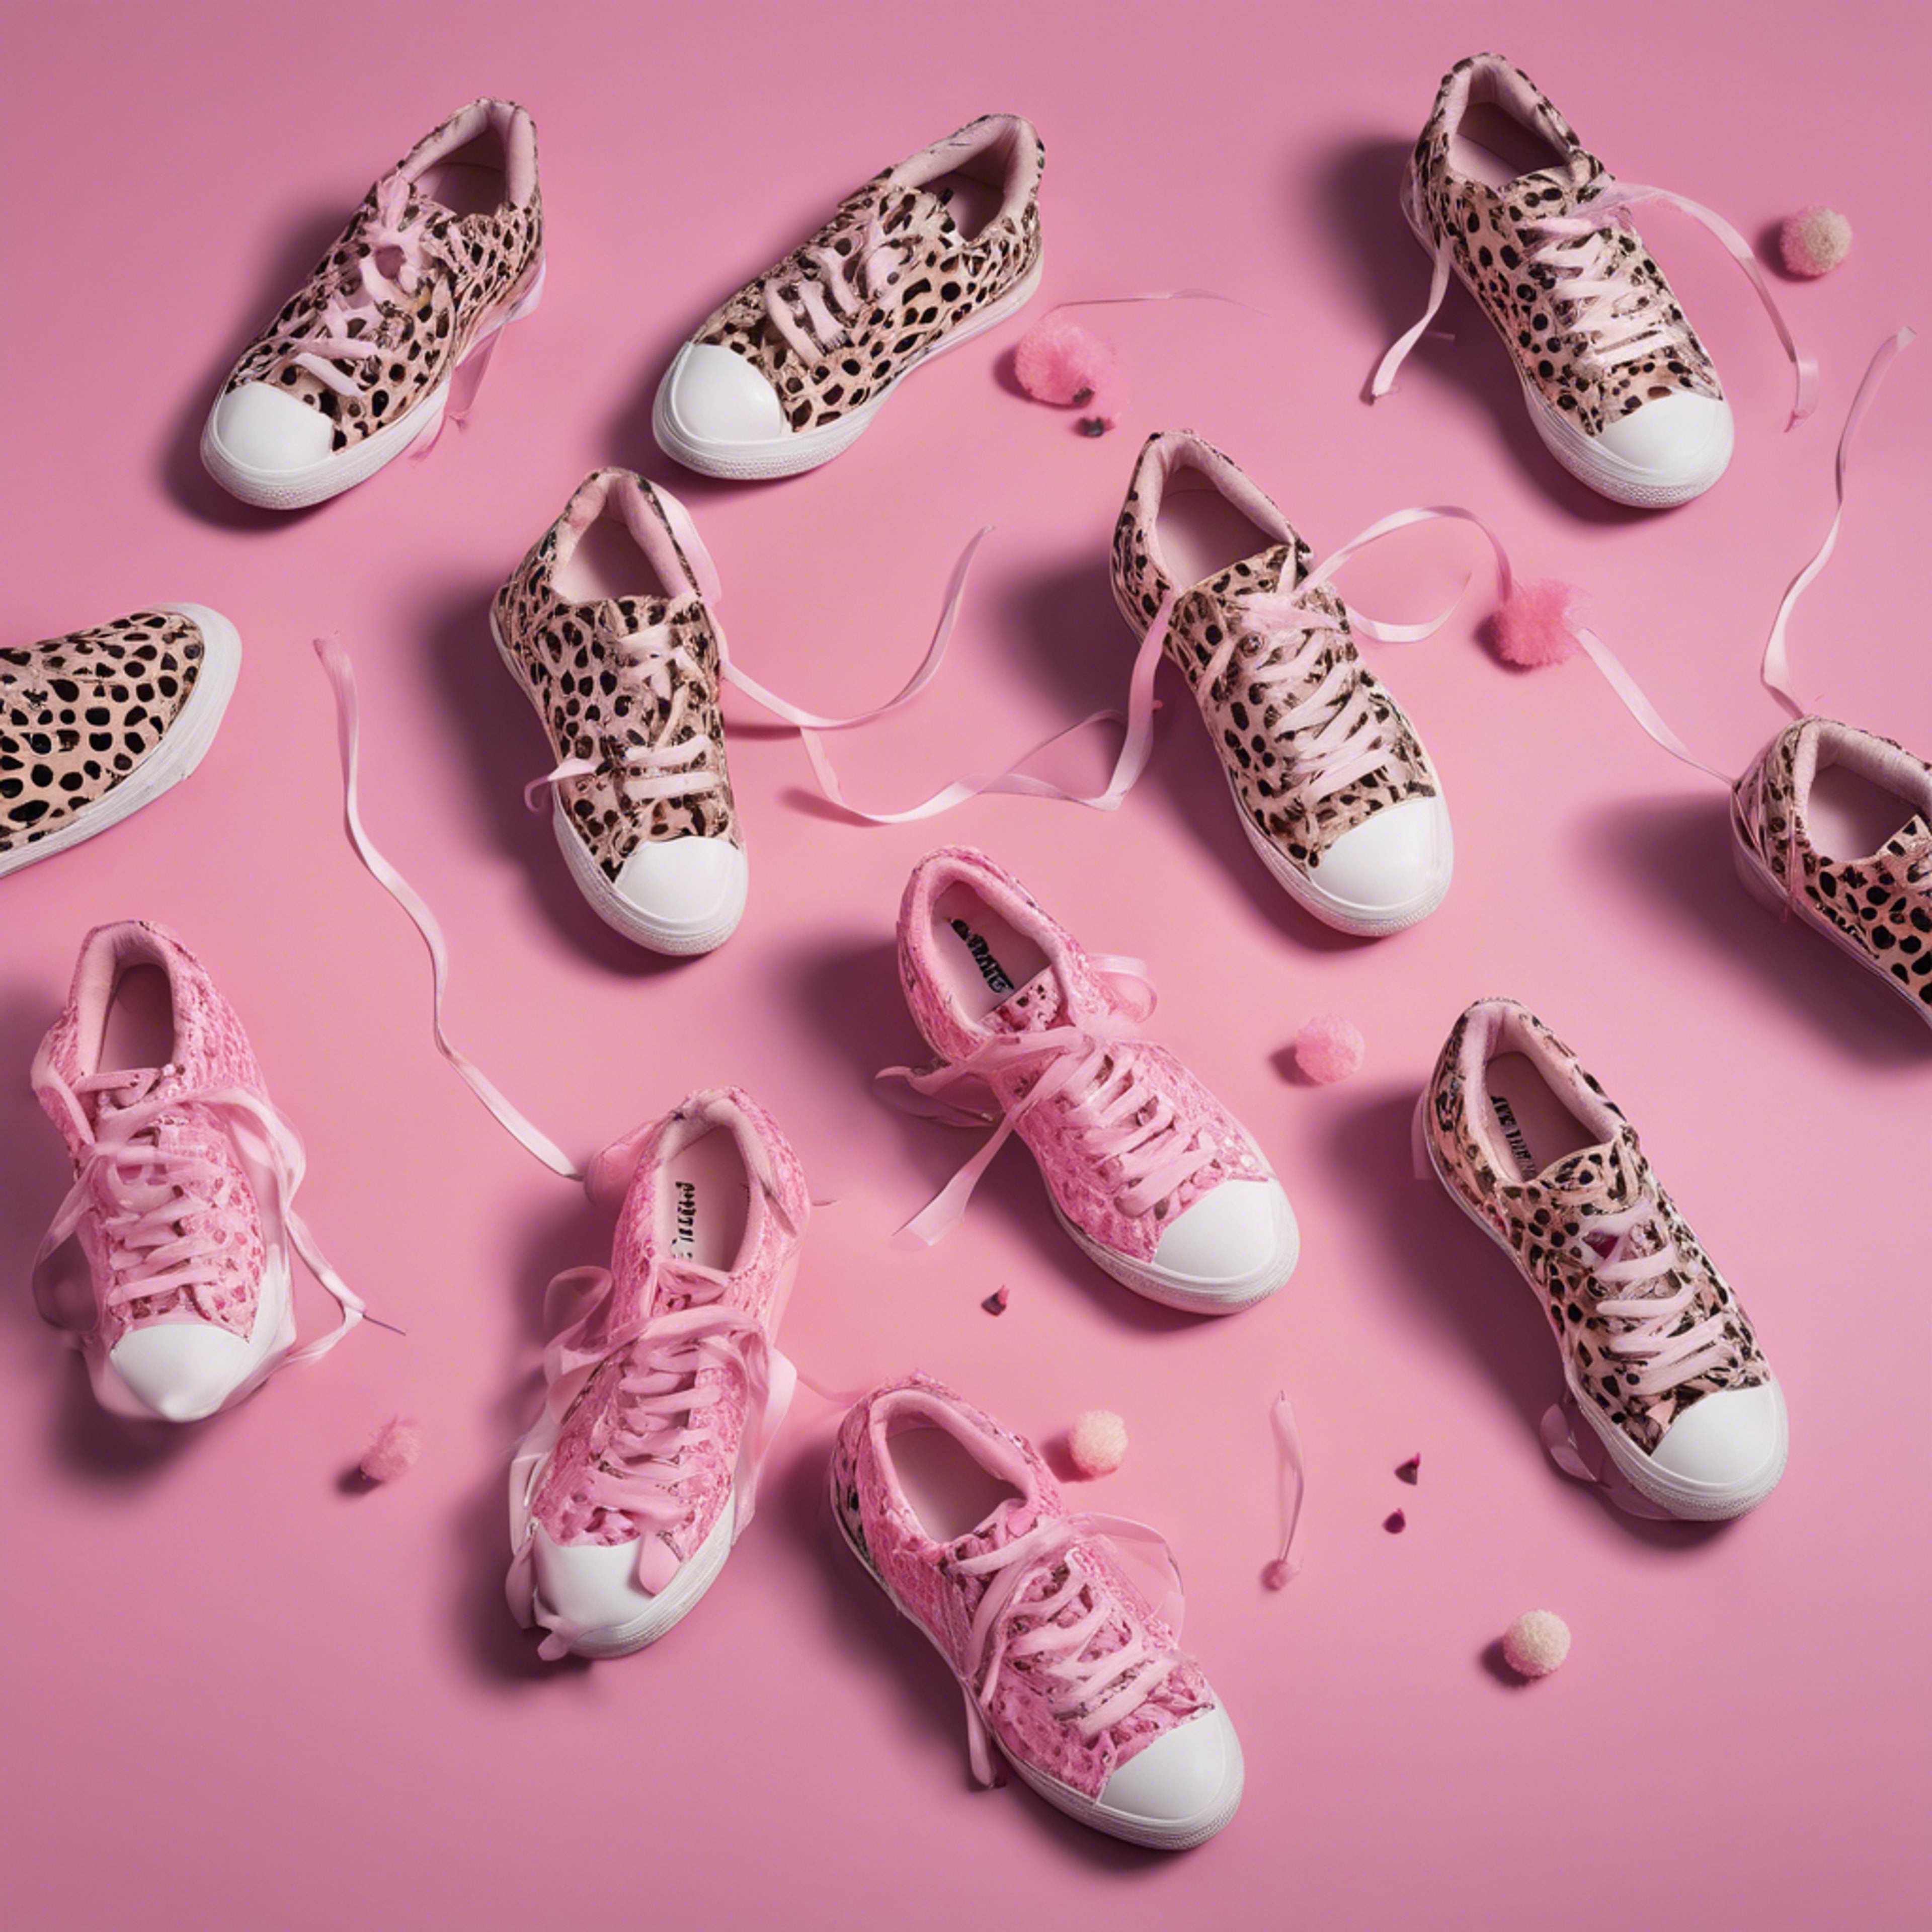 An aerial view of a pair of tennis shoes with a girly pink cheetah pattern. Hintergrund[69b37b649749417cbf35]